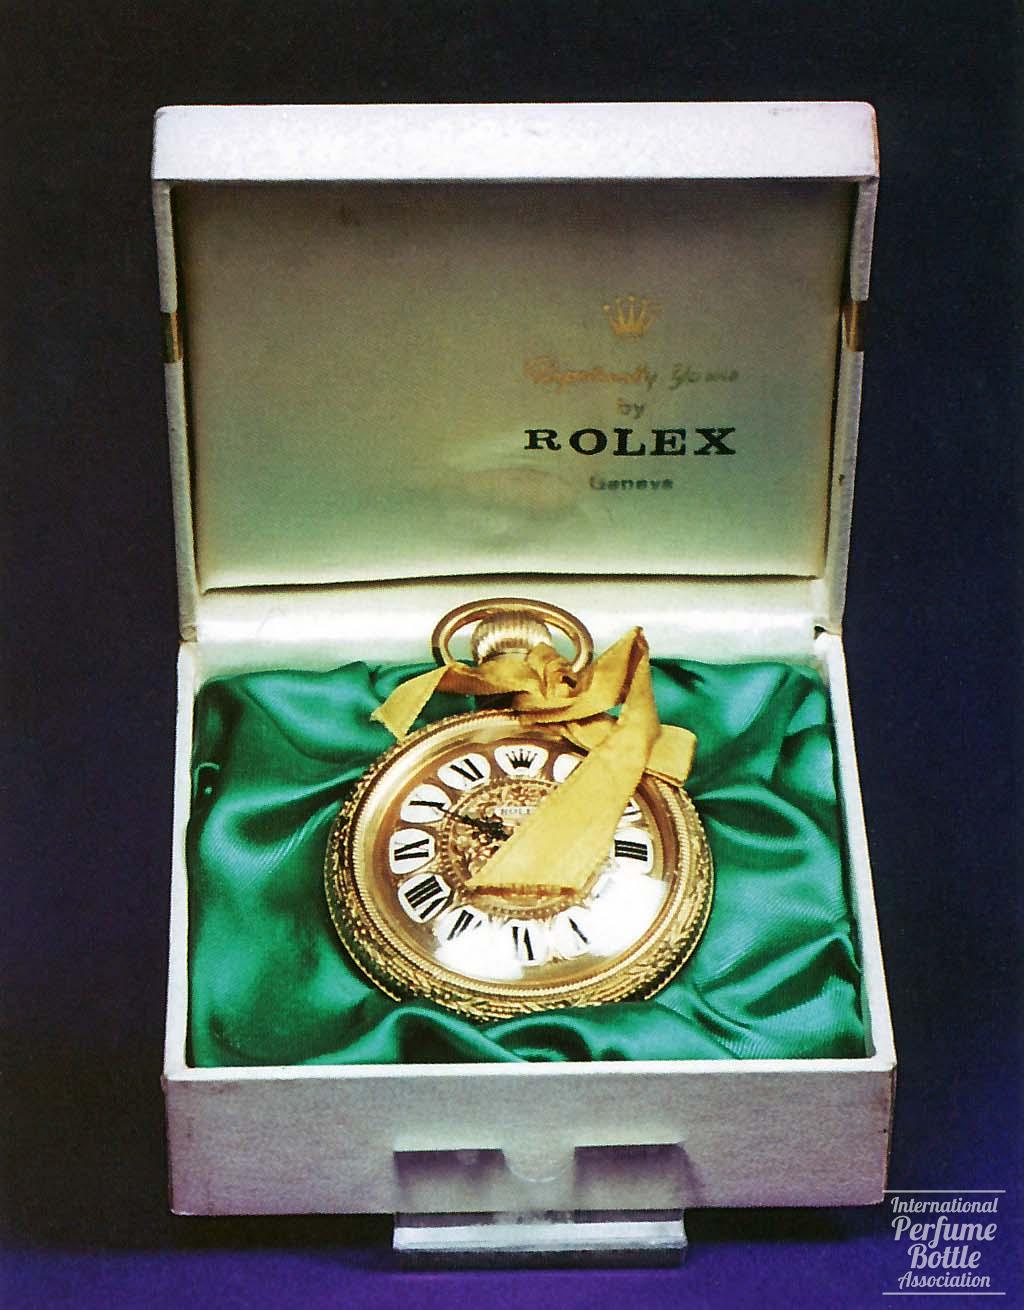 "Perpetually Yours" by Rolex